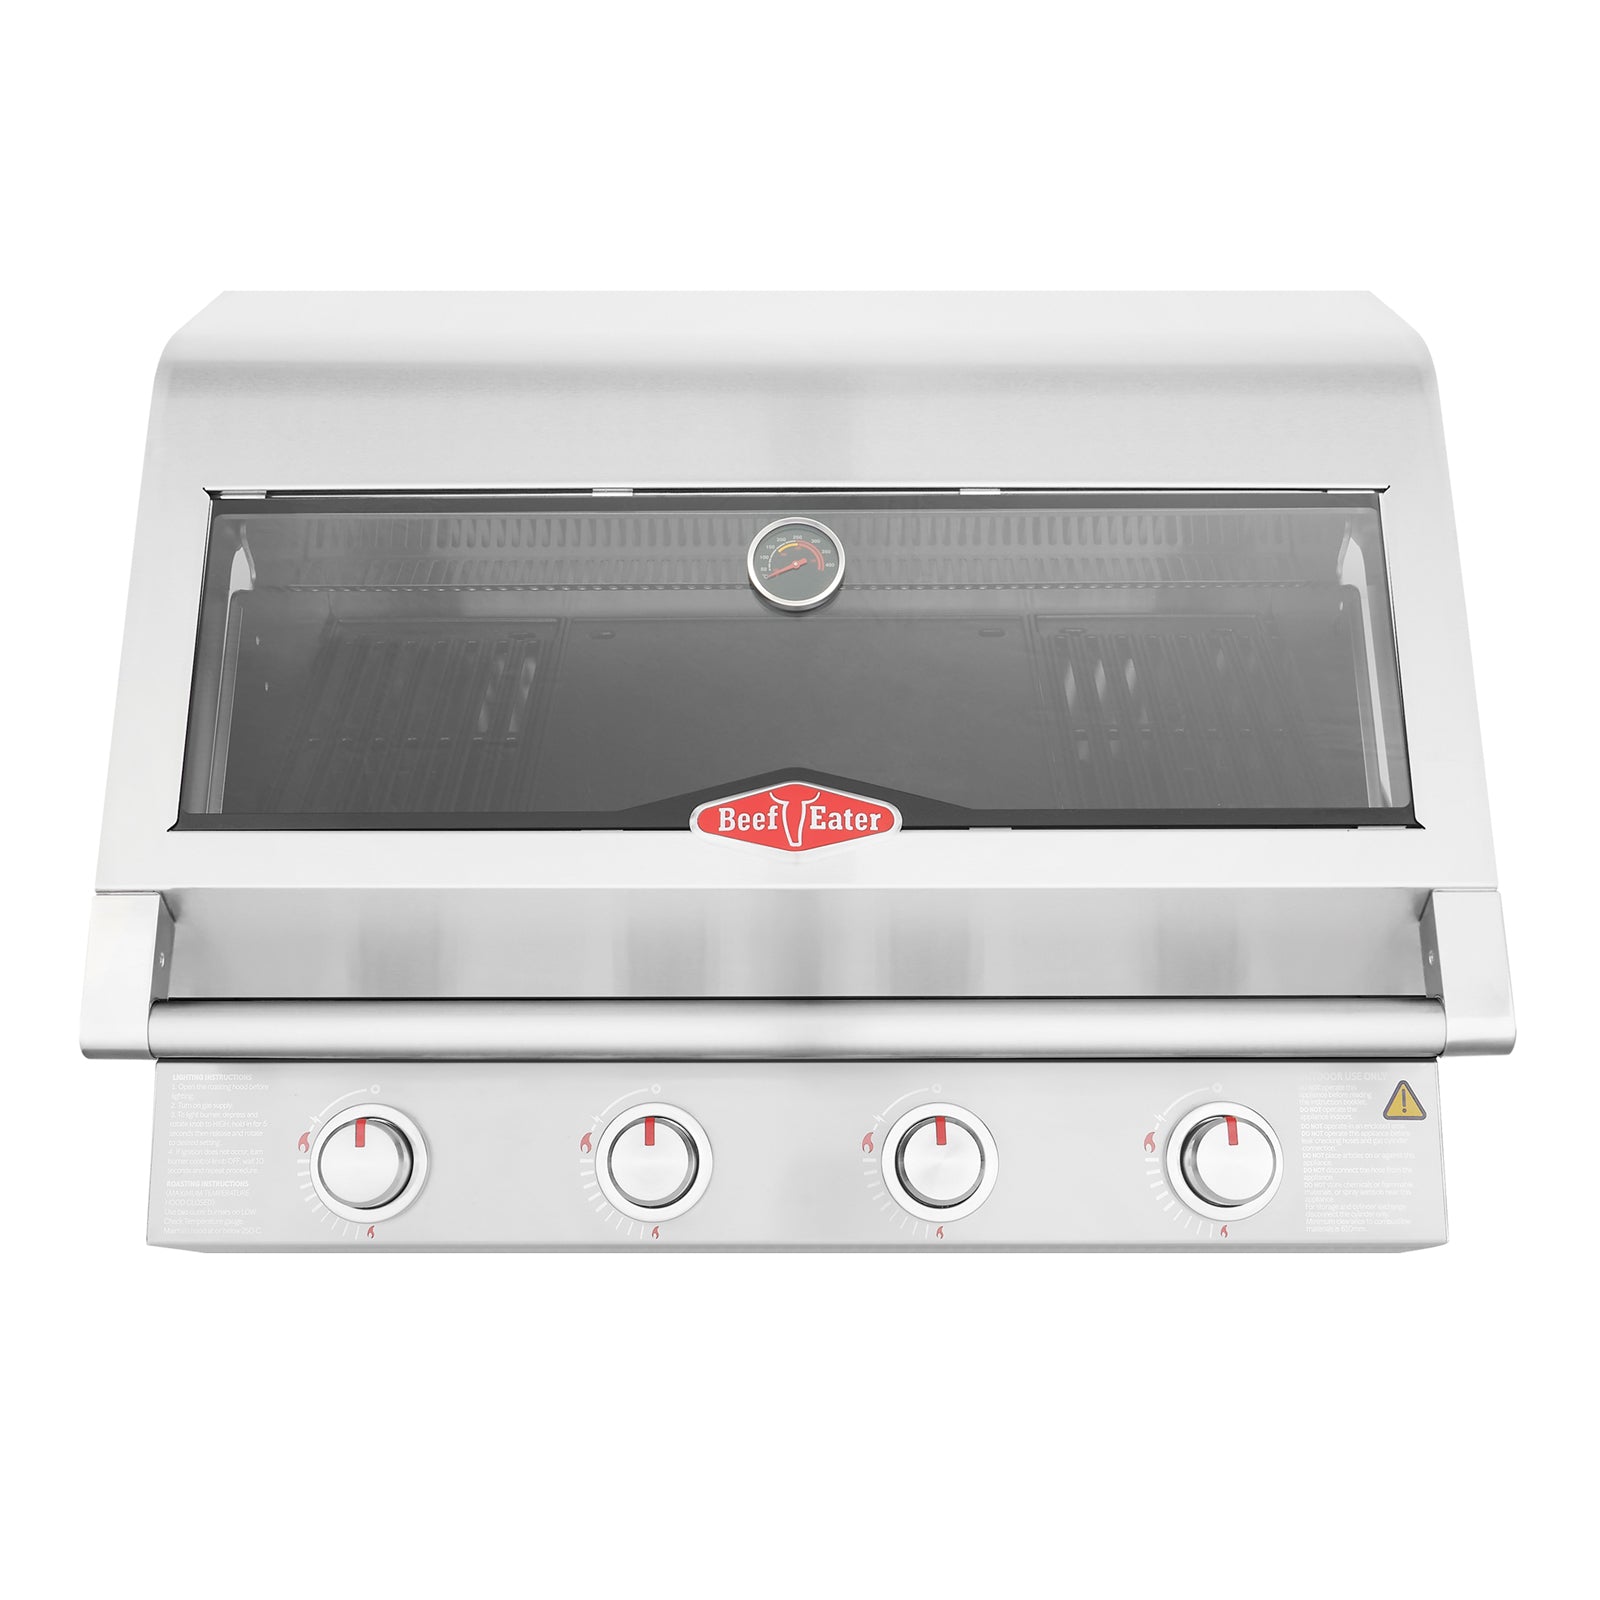 Beefeater 7000 Classic 4 Burner Built in BBQ